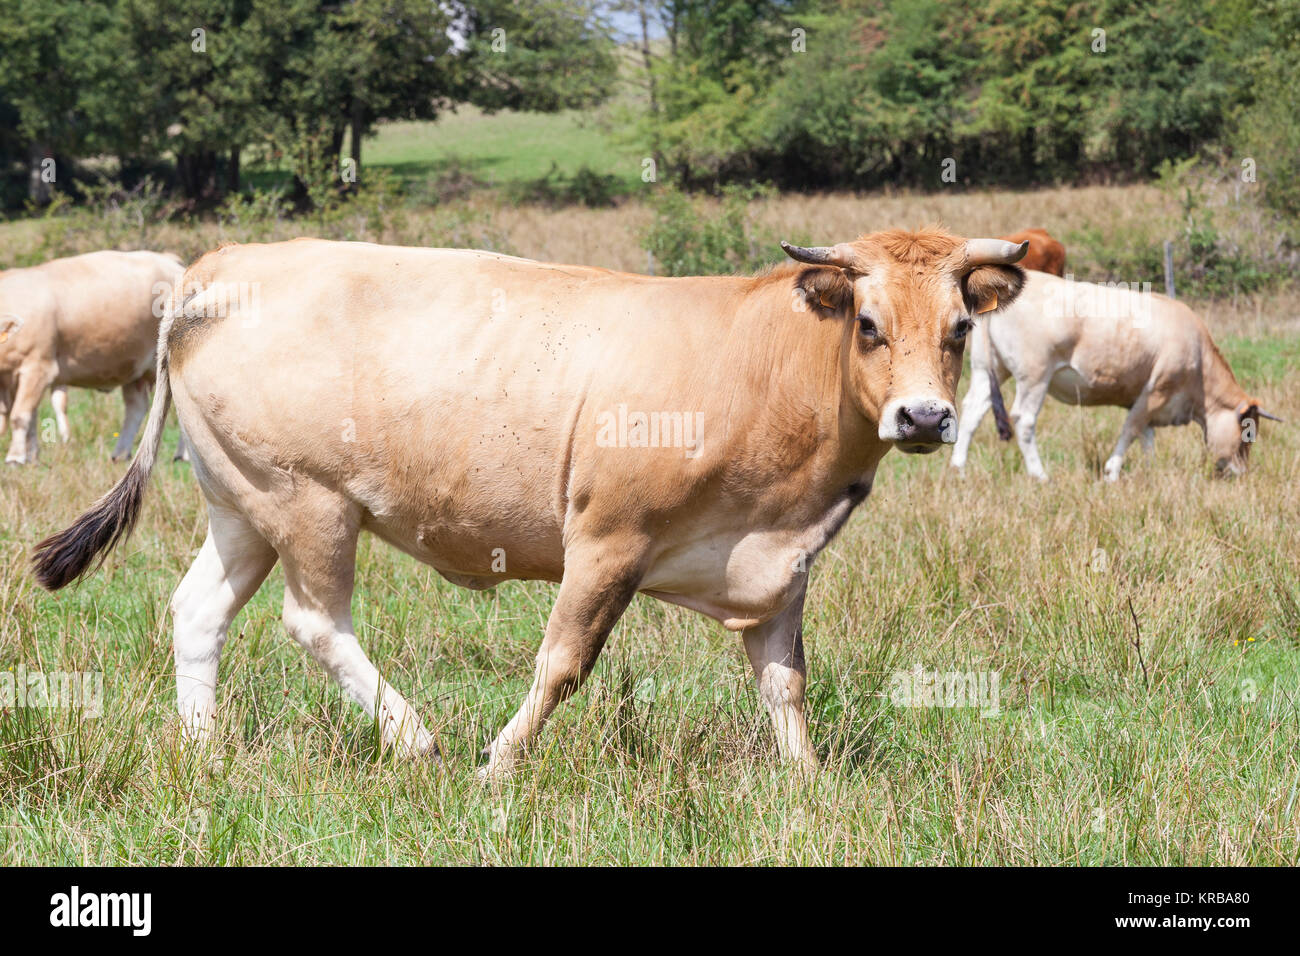 Aubrac beef cow in a pasture with a herd of cows, cattle looking at camera in a close up side view. French breed used for suckling and meat production Stock Photo